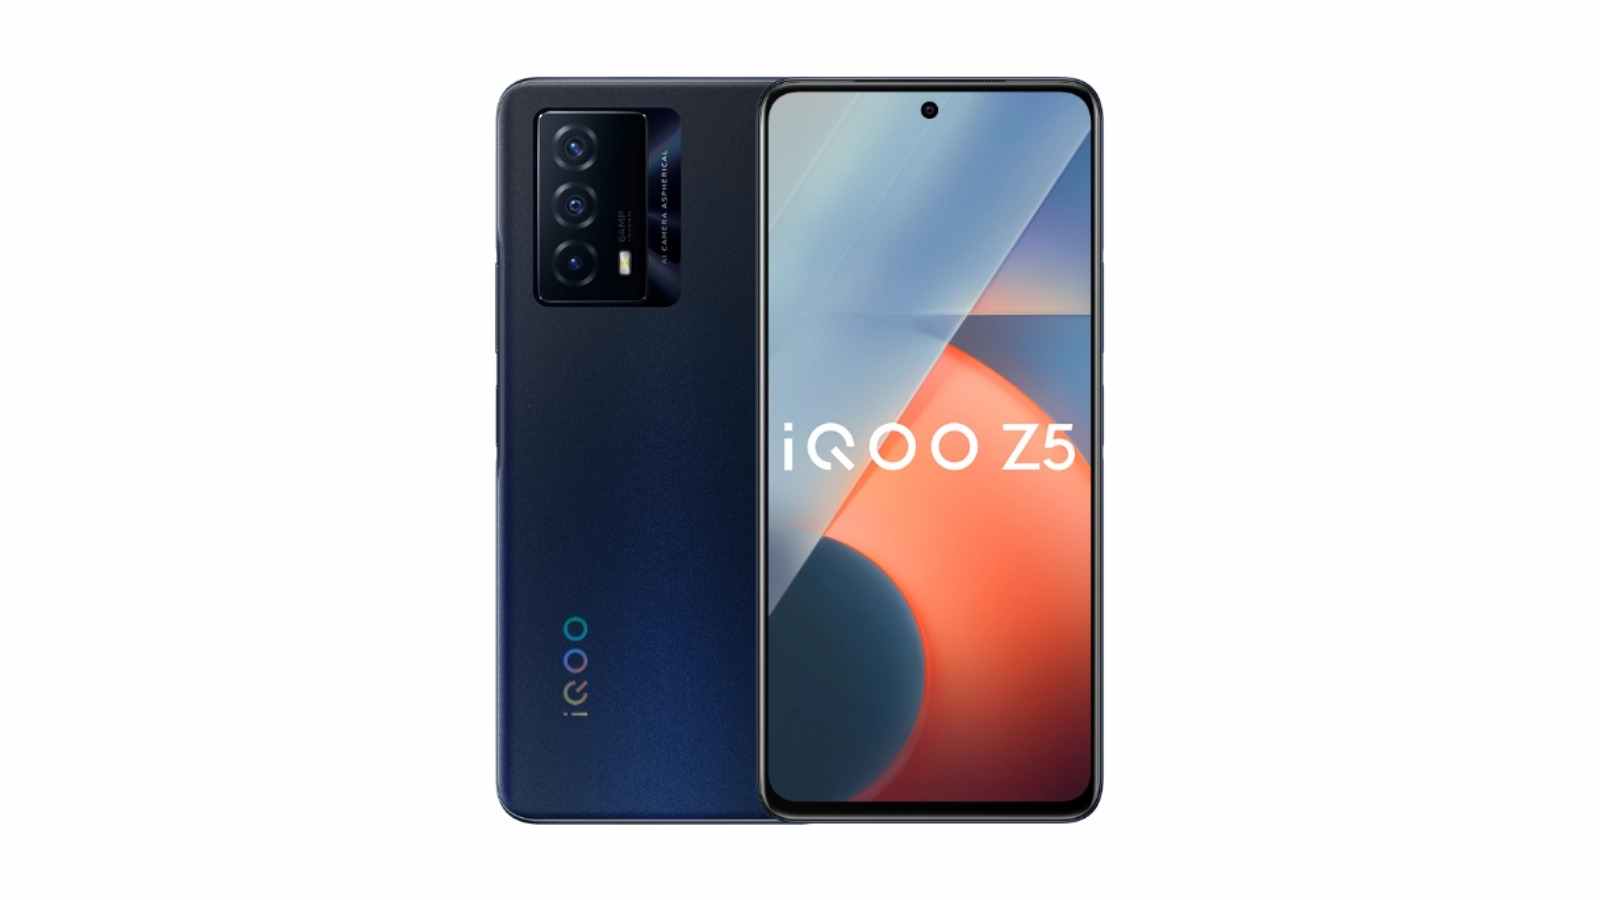 iQOO Z5 5G with Snapdragon 778G, 64MP triple rear camera launched: Price, Specifications